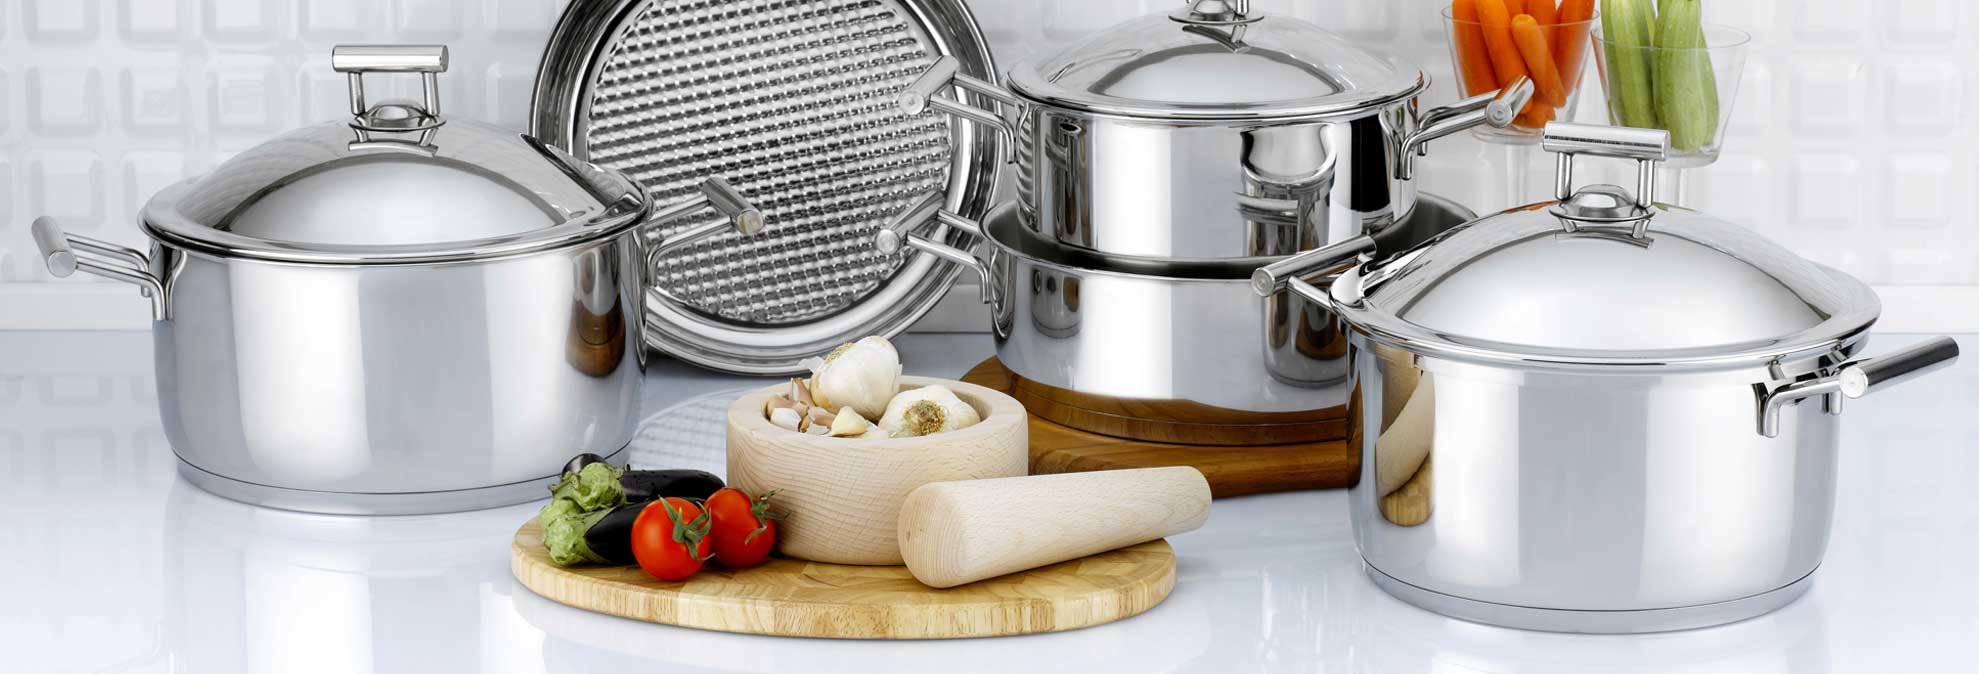 is cuisinart cookware worth it